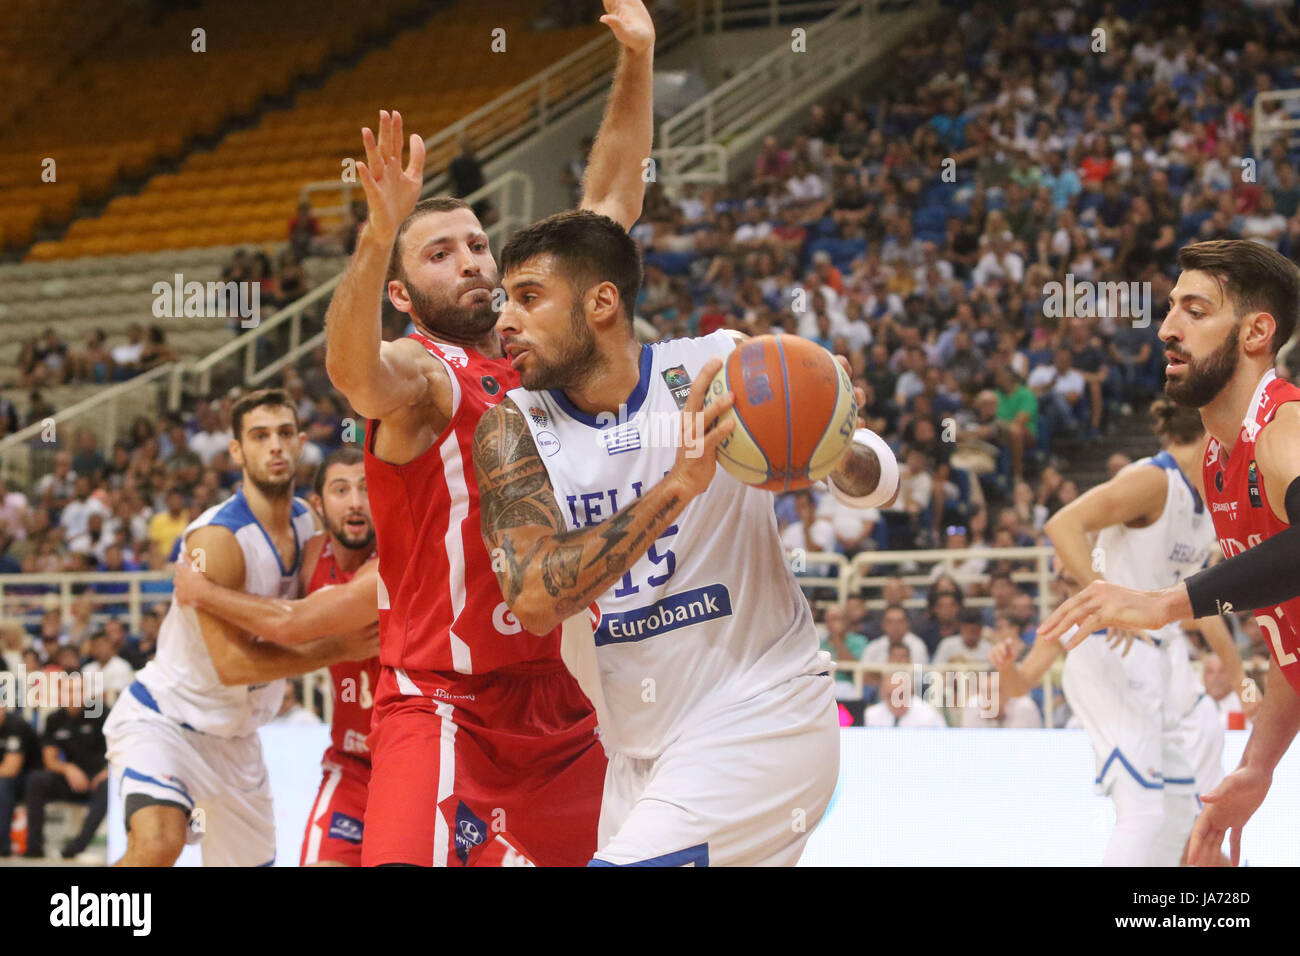 Athens, Greece. 23rd Aug, 2017. Greece's Yiorgos Printezis, center, at the Acropolis basketball tournament at the indoor Olympic stadium of Athens Georgia beats Greece 72-71 during the group stage match of the Acropolis International Basketball Tournament. Credit: SOPA Images Limited/Alamy Live News Stock Photo